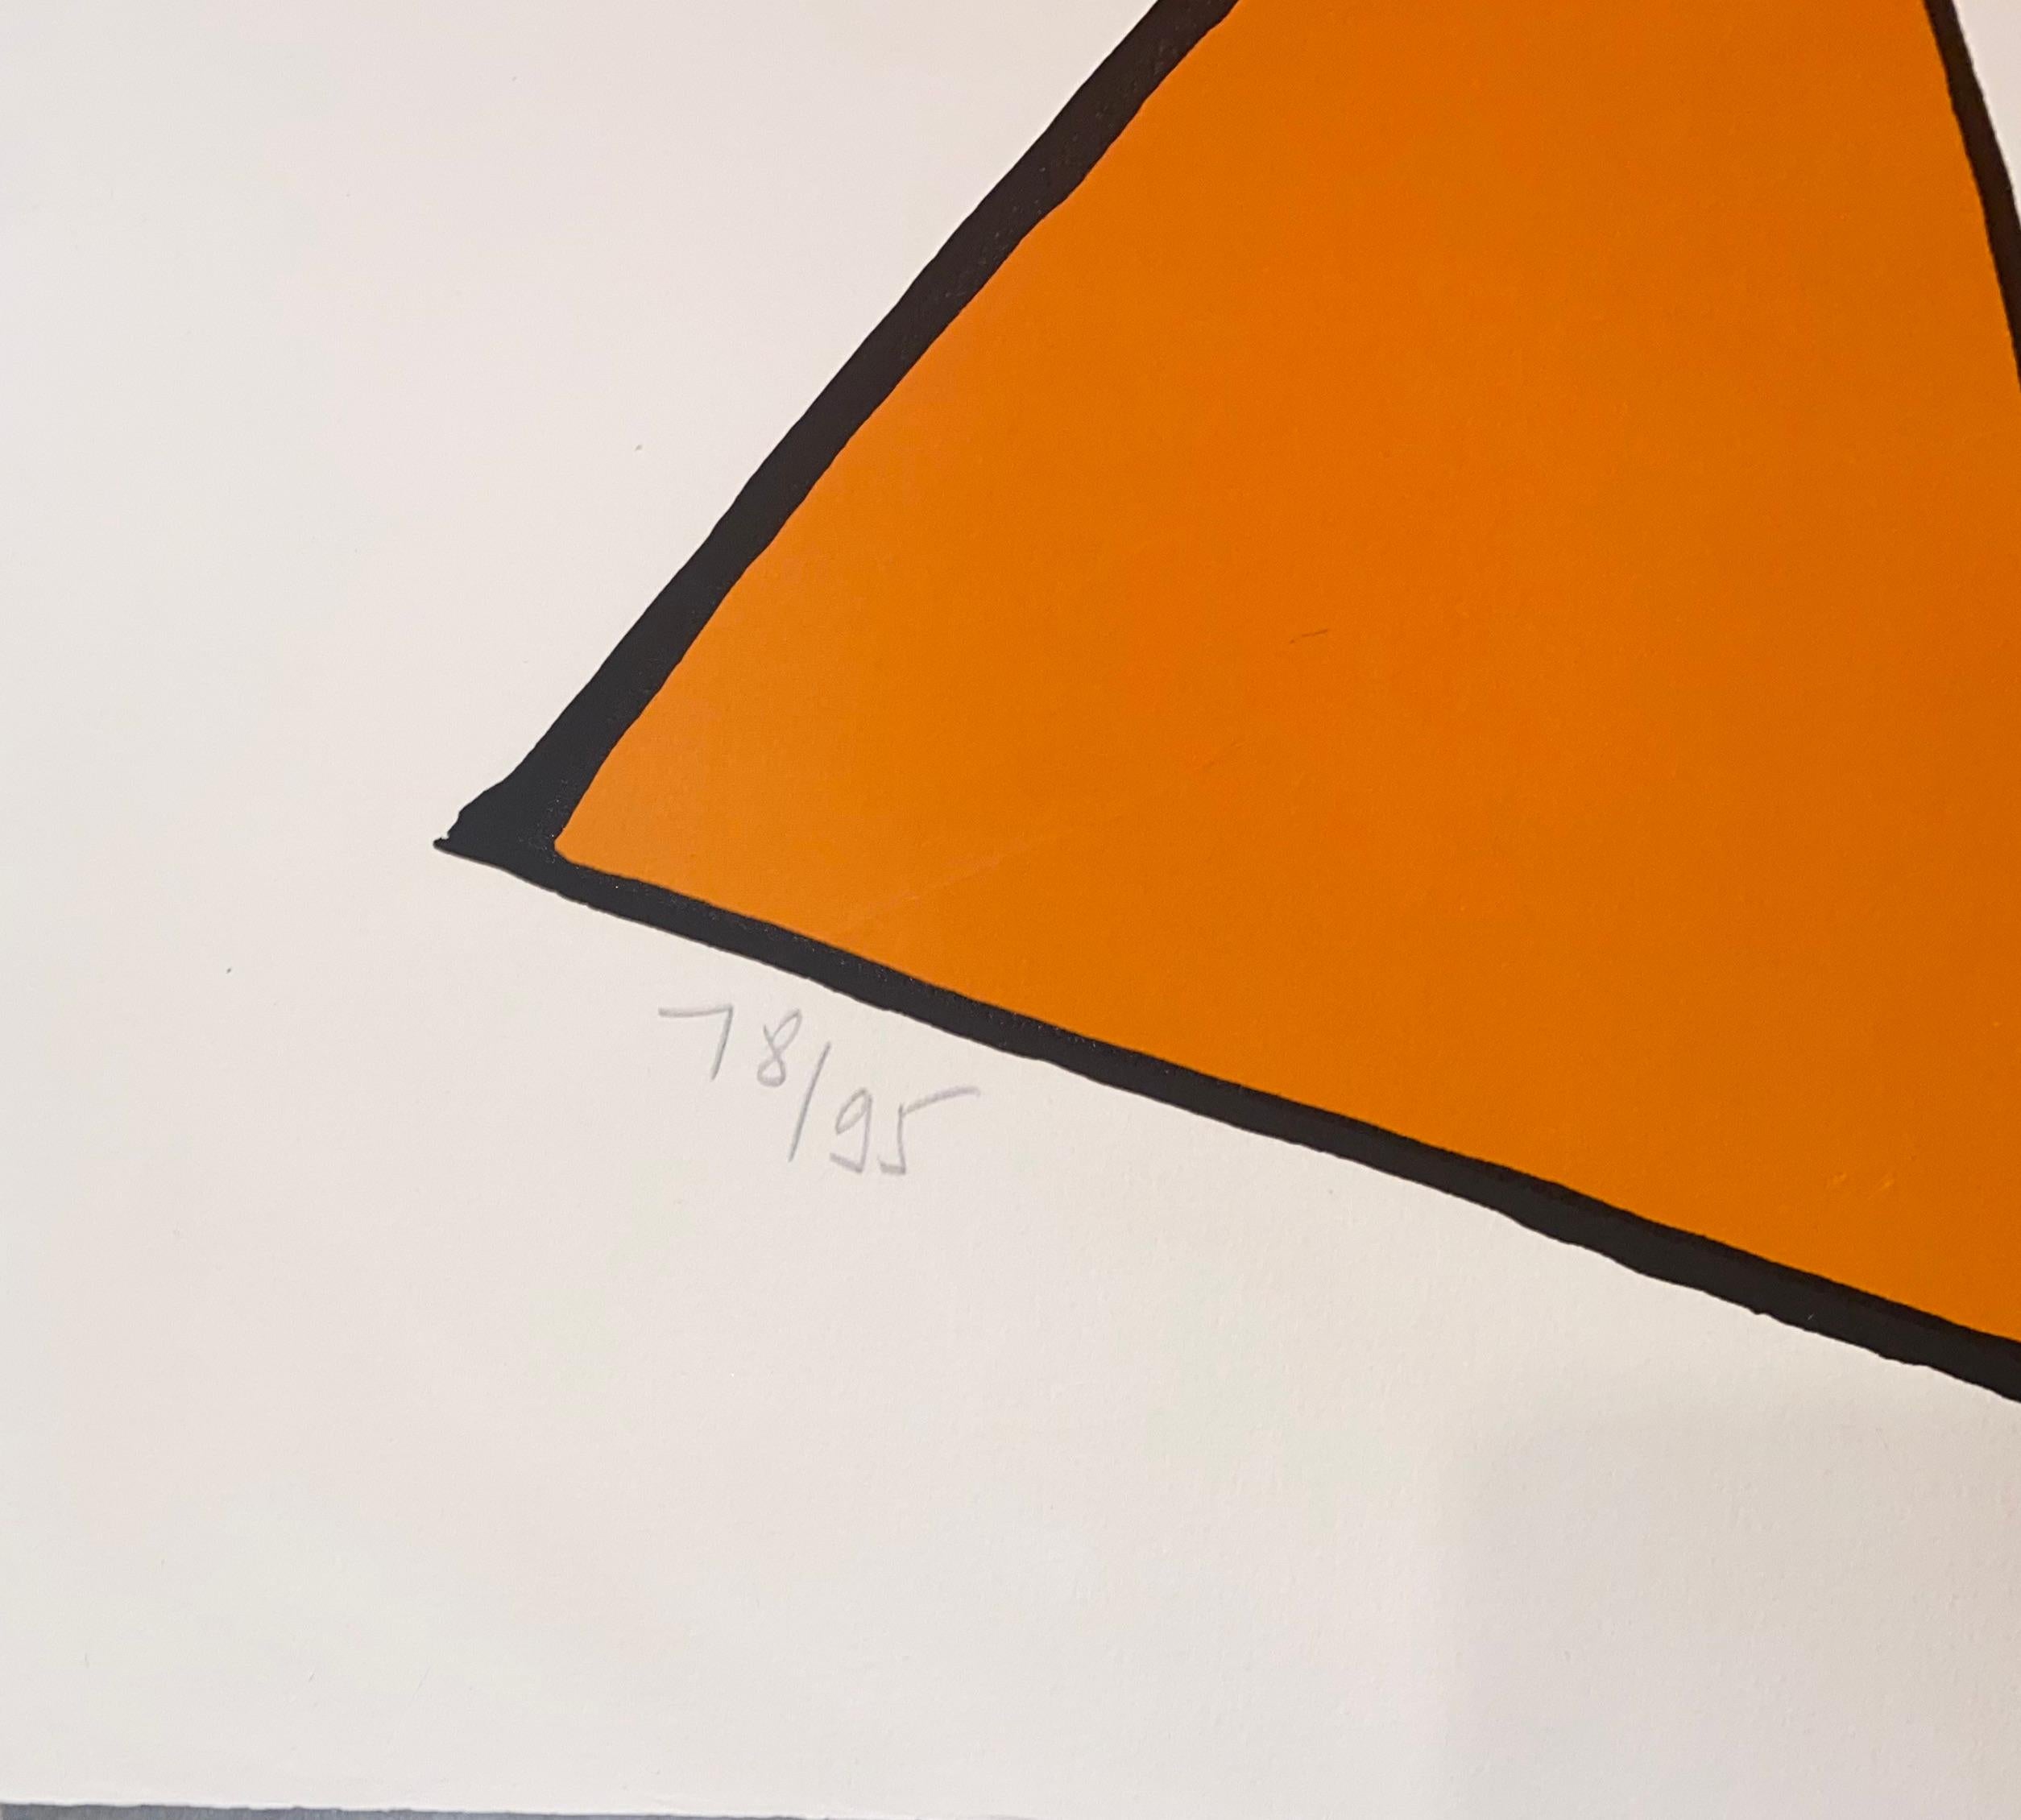 Alexander Calder (American, 1898-1976)
Signed: Calder (Lower, Right)
“Four Great Pyramids”, 1970
Lithograph in Colors on Arches Paper
Sheet Size: 30” x 43”
Numbered: Hand signed and numbered from an edition of 90

This piece is in good condition. It